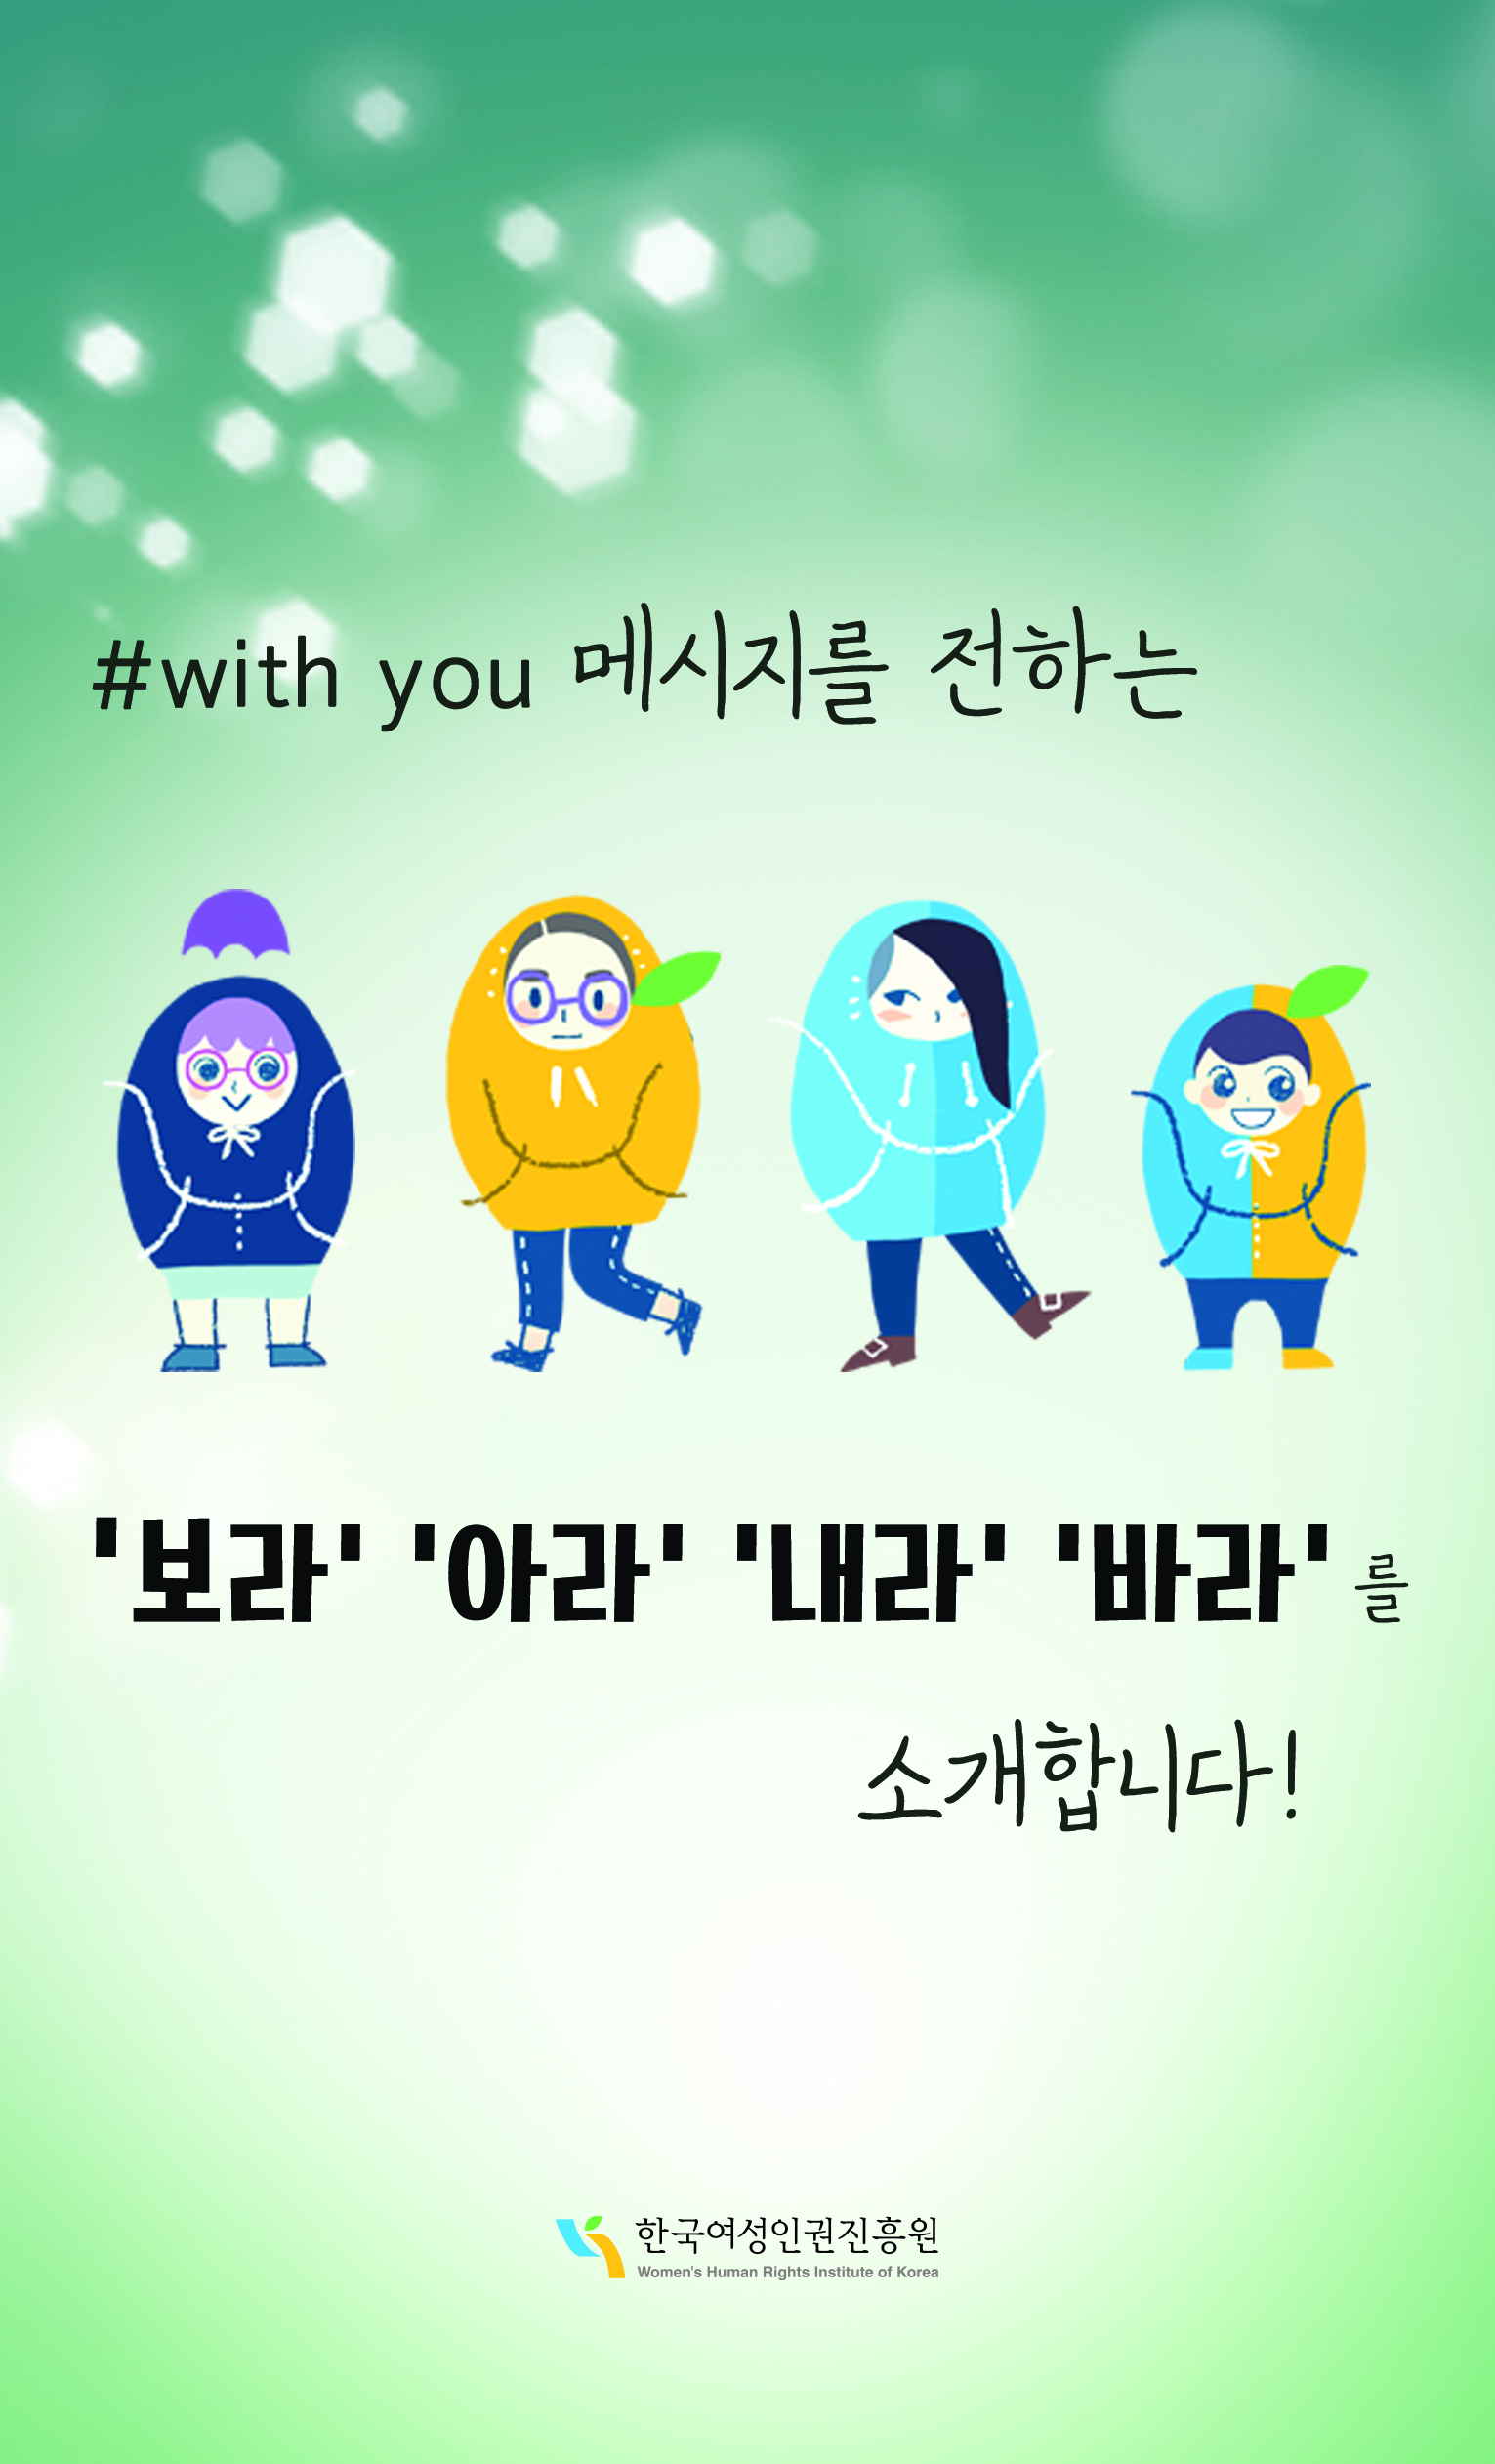 with you 메시지를 전하는